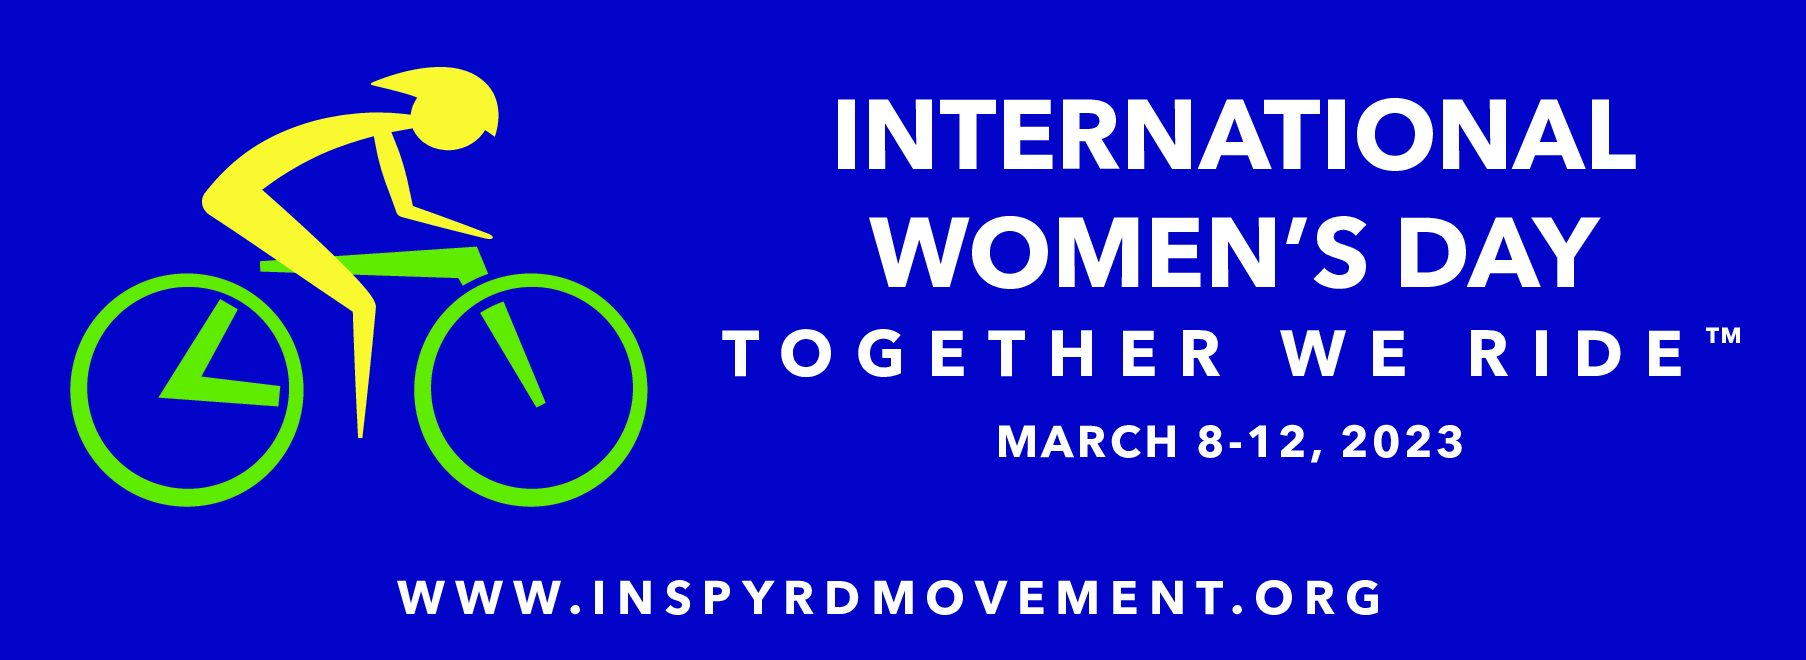 2022 International Women’s Day Together We Ride: A Ride for Equality, Inclusion and Positive Social Change. 